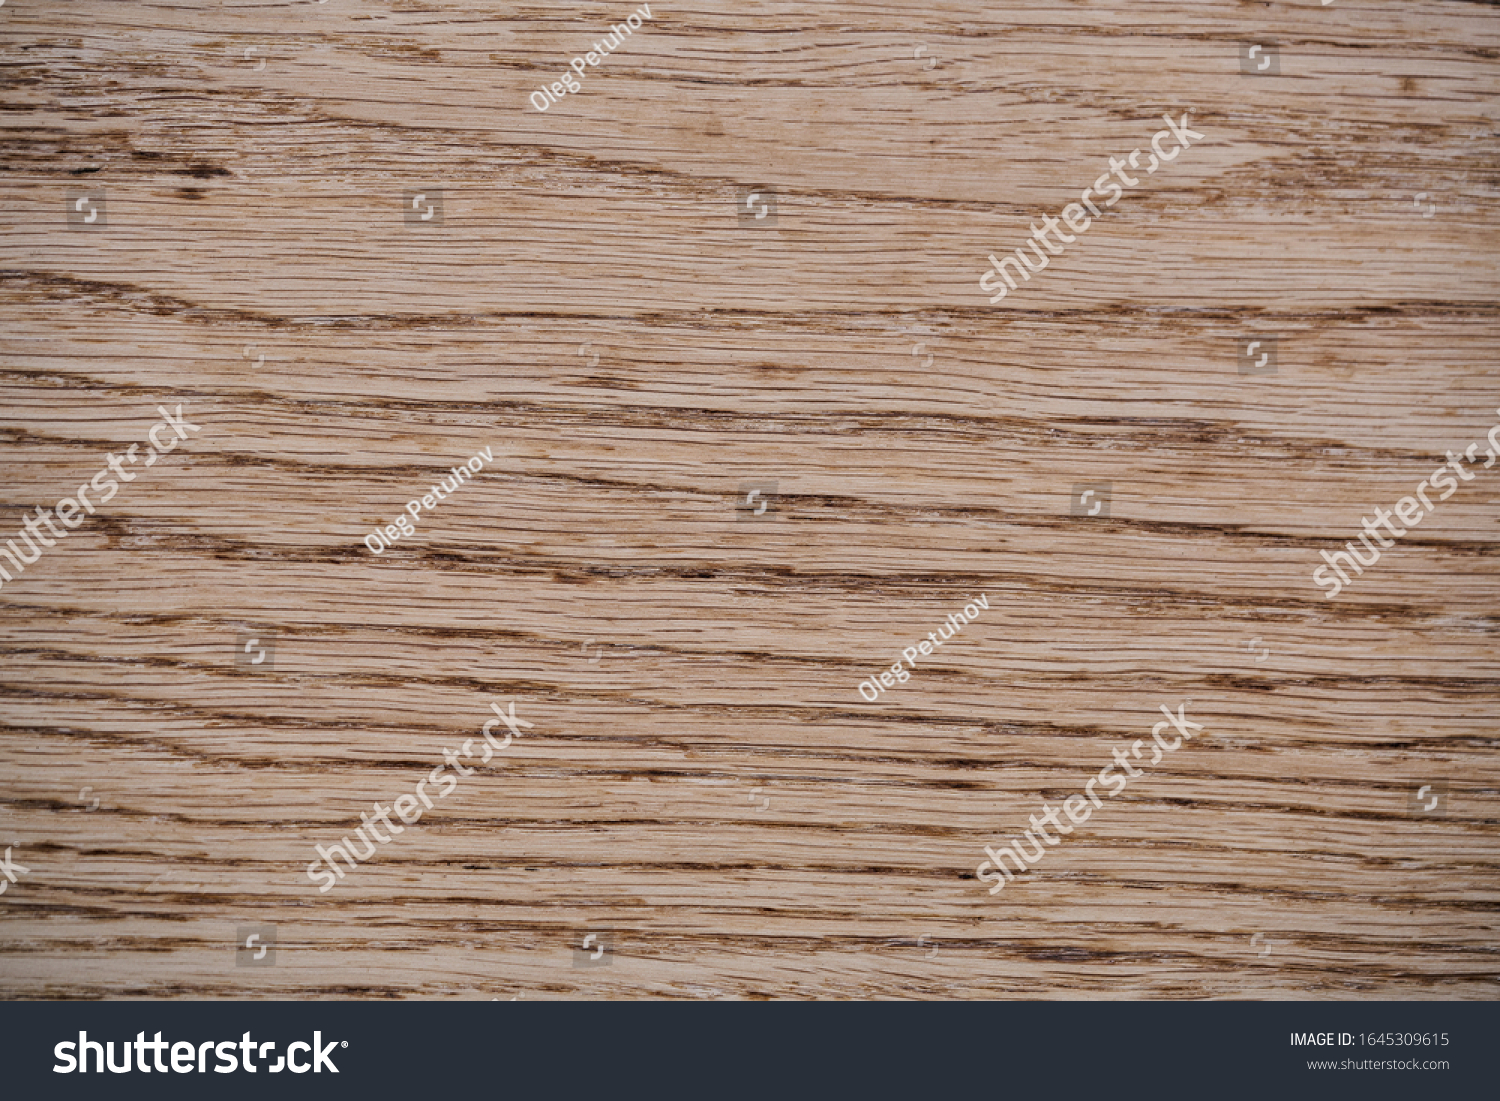 Old grunge dark textured wooden background,The surface of the brown wood texture - Image. #1645309615